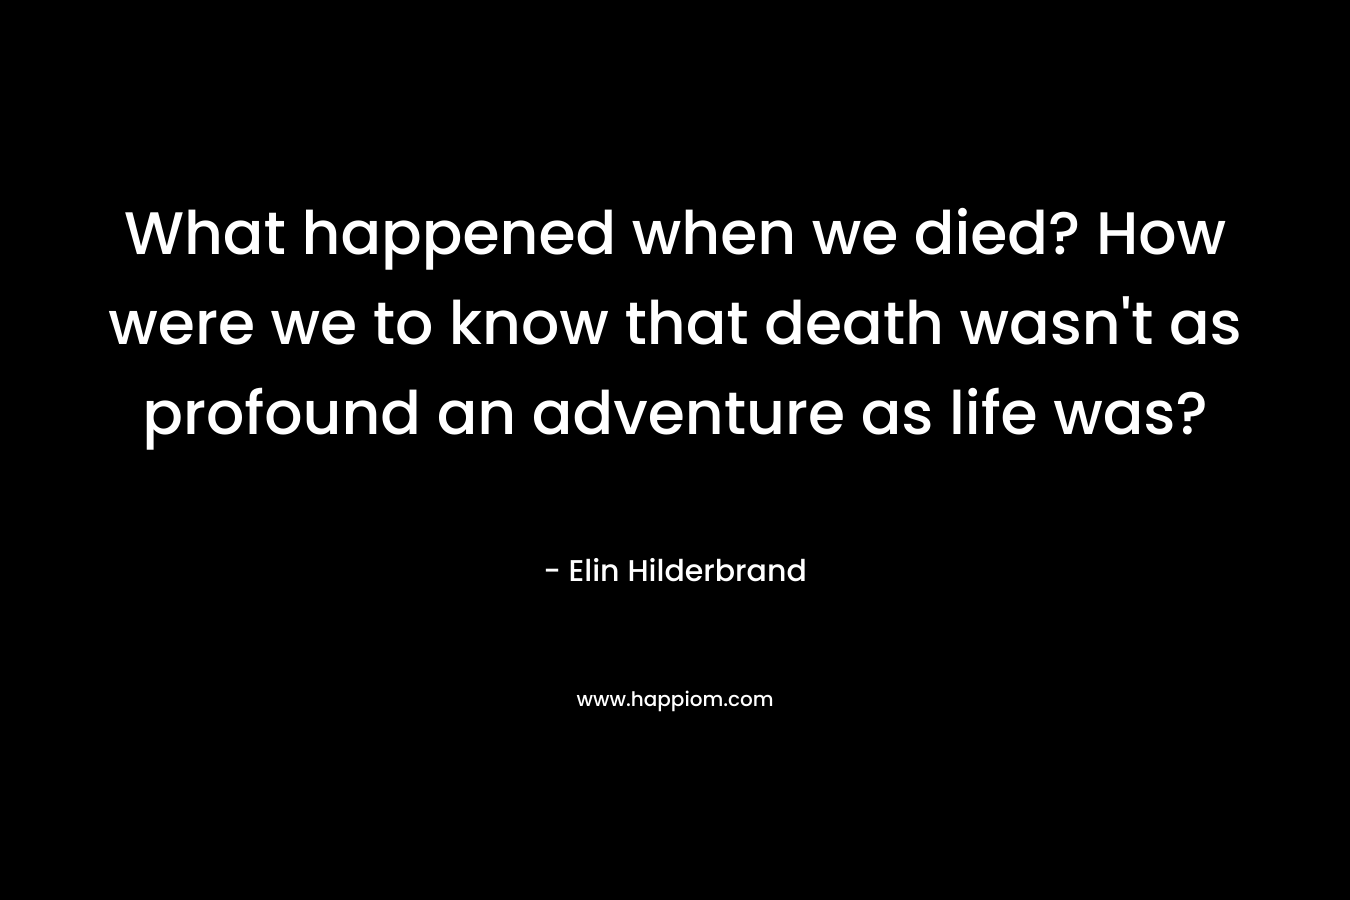 What happened when we died? How were we to know that death wasn’t as profound an adventure as life was? – Elin Hilderbrand